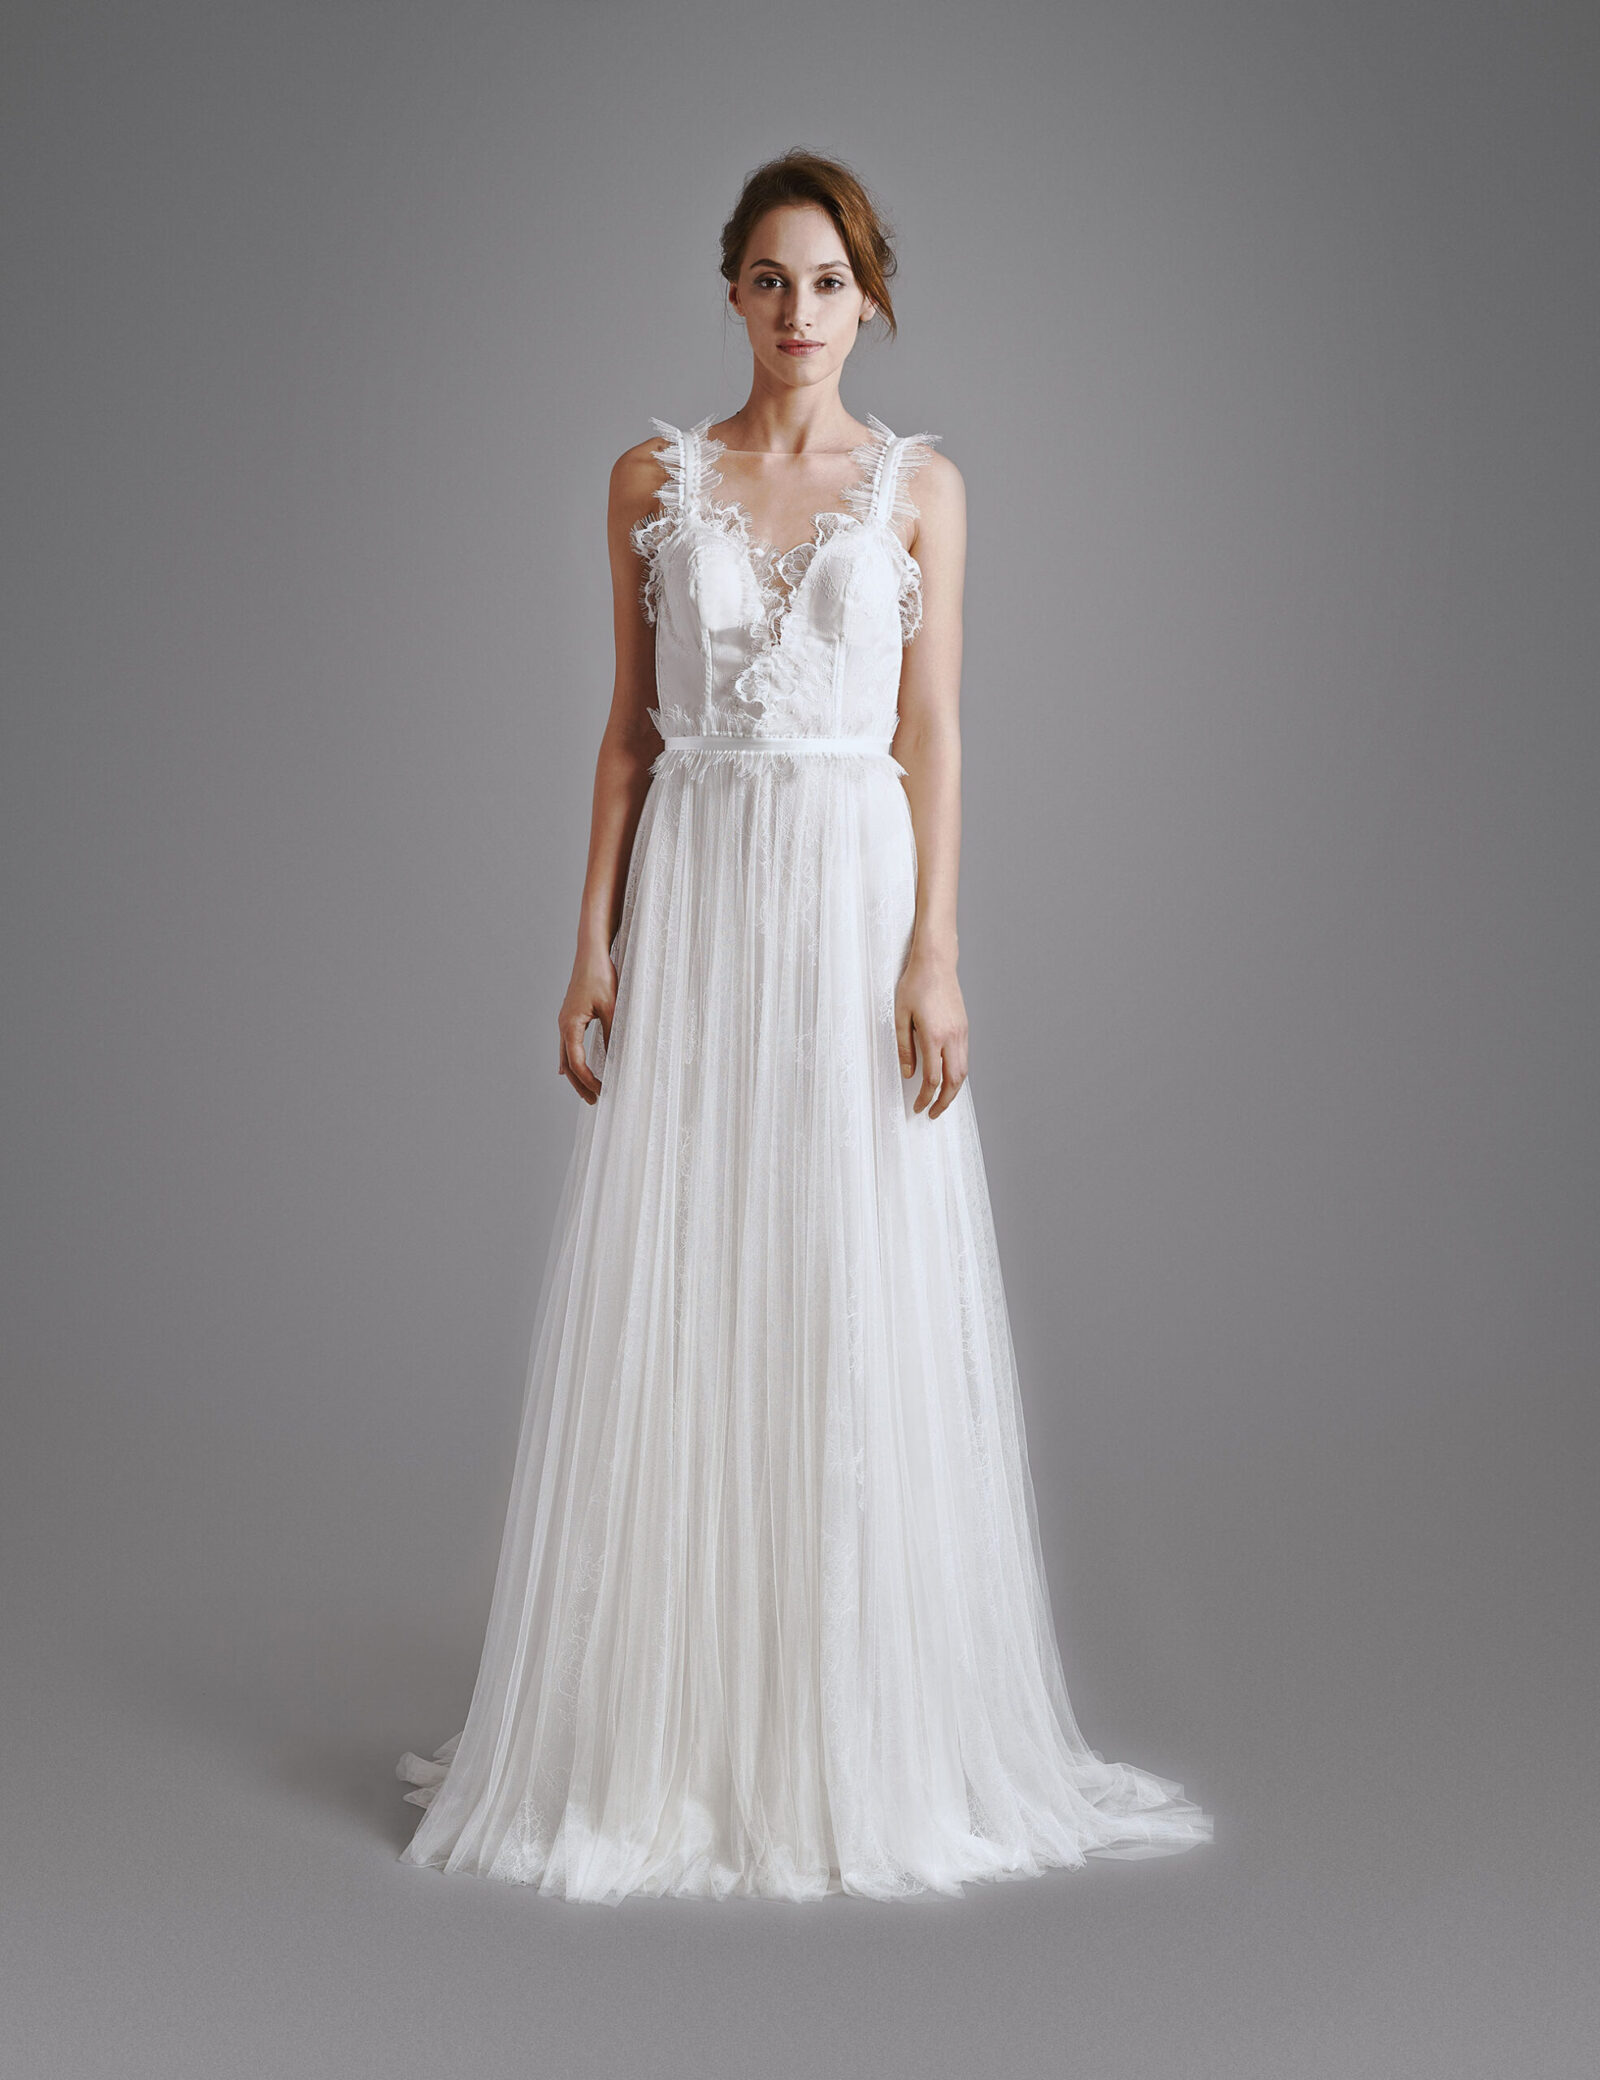 Romantic wedding dress WILLOW BUTERFLY BHARB-WILLOW-BUTTERFLY-BH2020-0005-001-tall